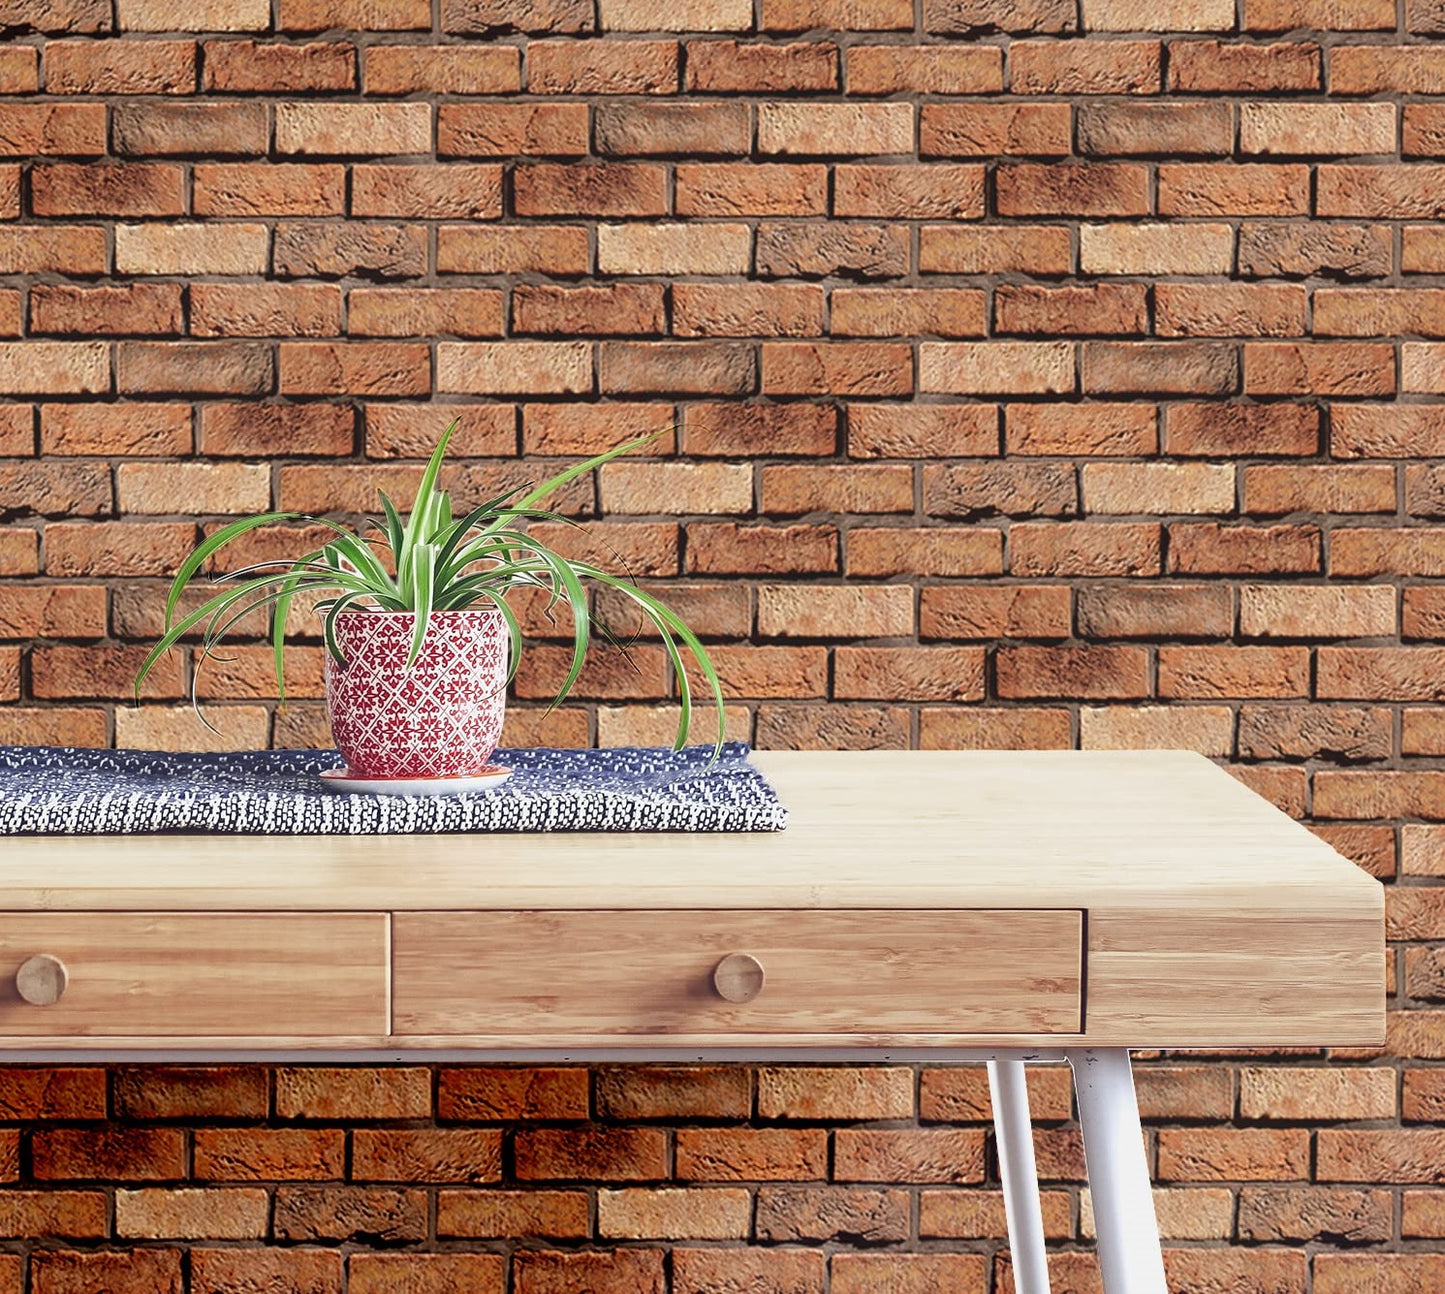 45 x 200 CM Brick Marble wallpapers for kitchen oil proof roll | kitchen self stickers sheet | wallpaper stickers | kitchen platform sheets | kitchen platform sticker (Set of 2)